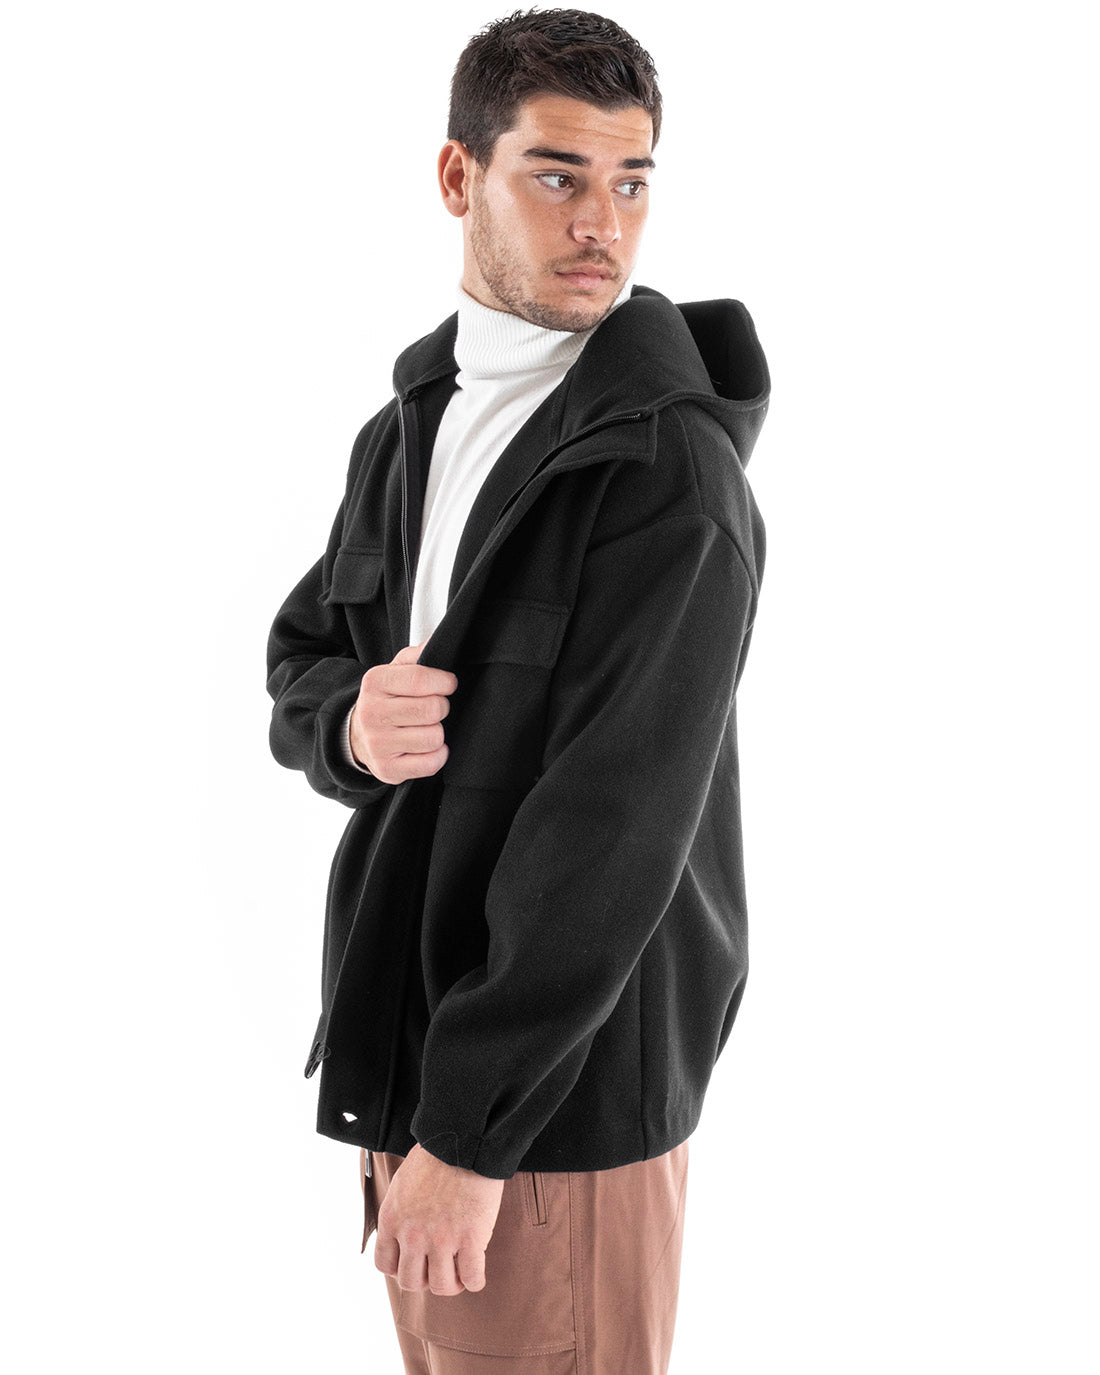 Coat Jacket Men's Jacket With Zip Suede Hood Solid Color Black Casual GIOSAL-G2947A